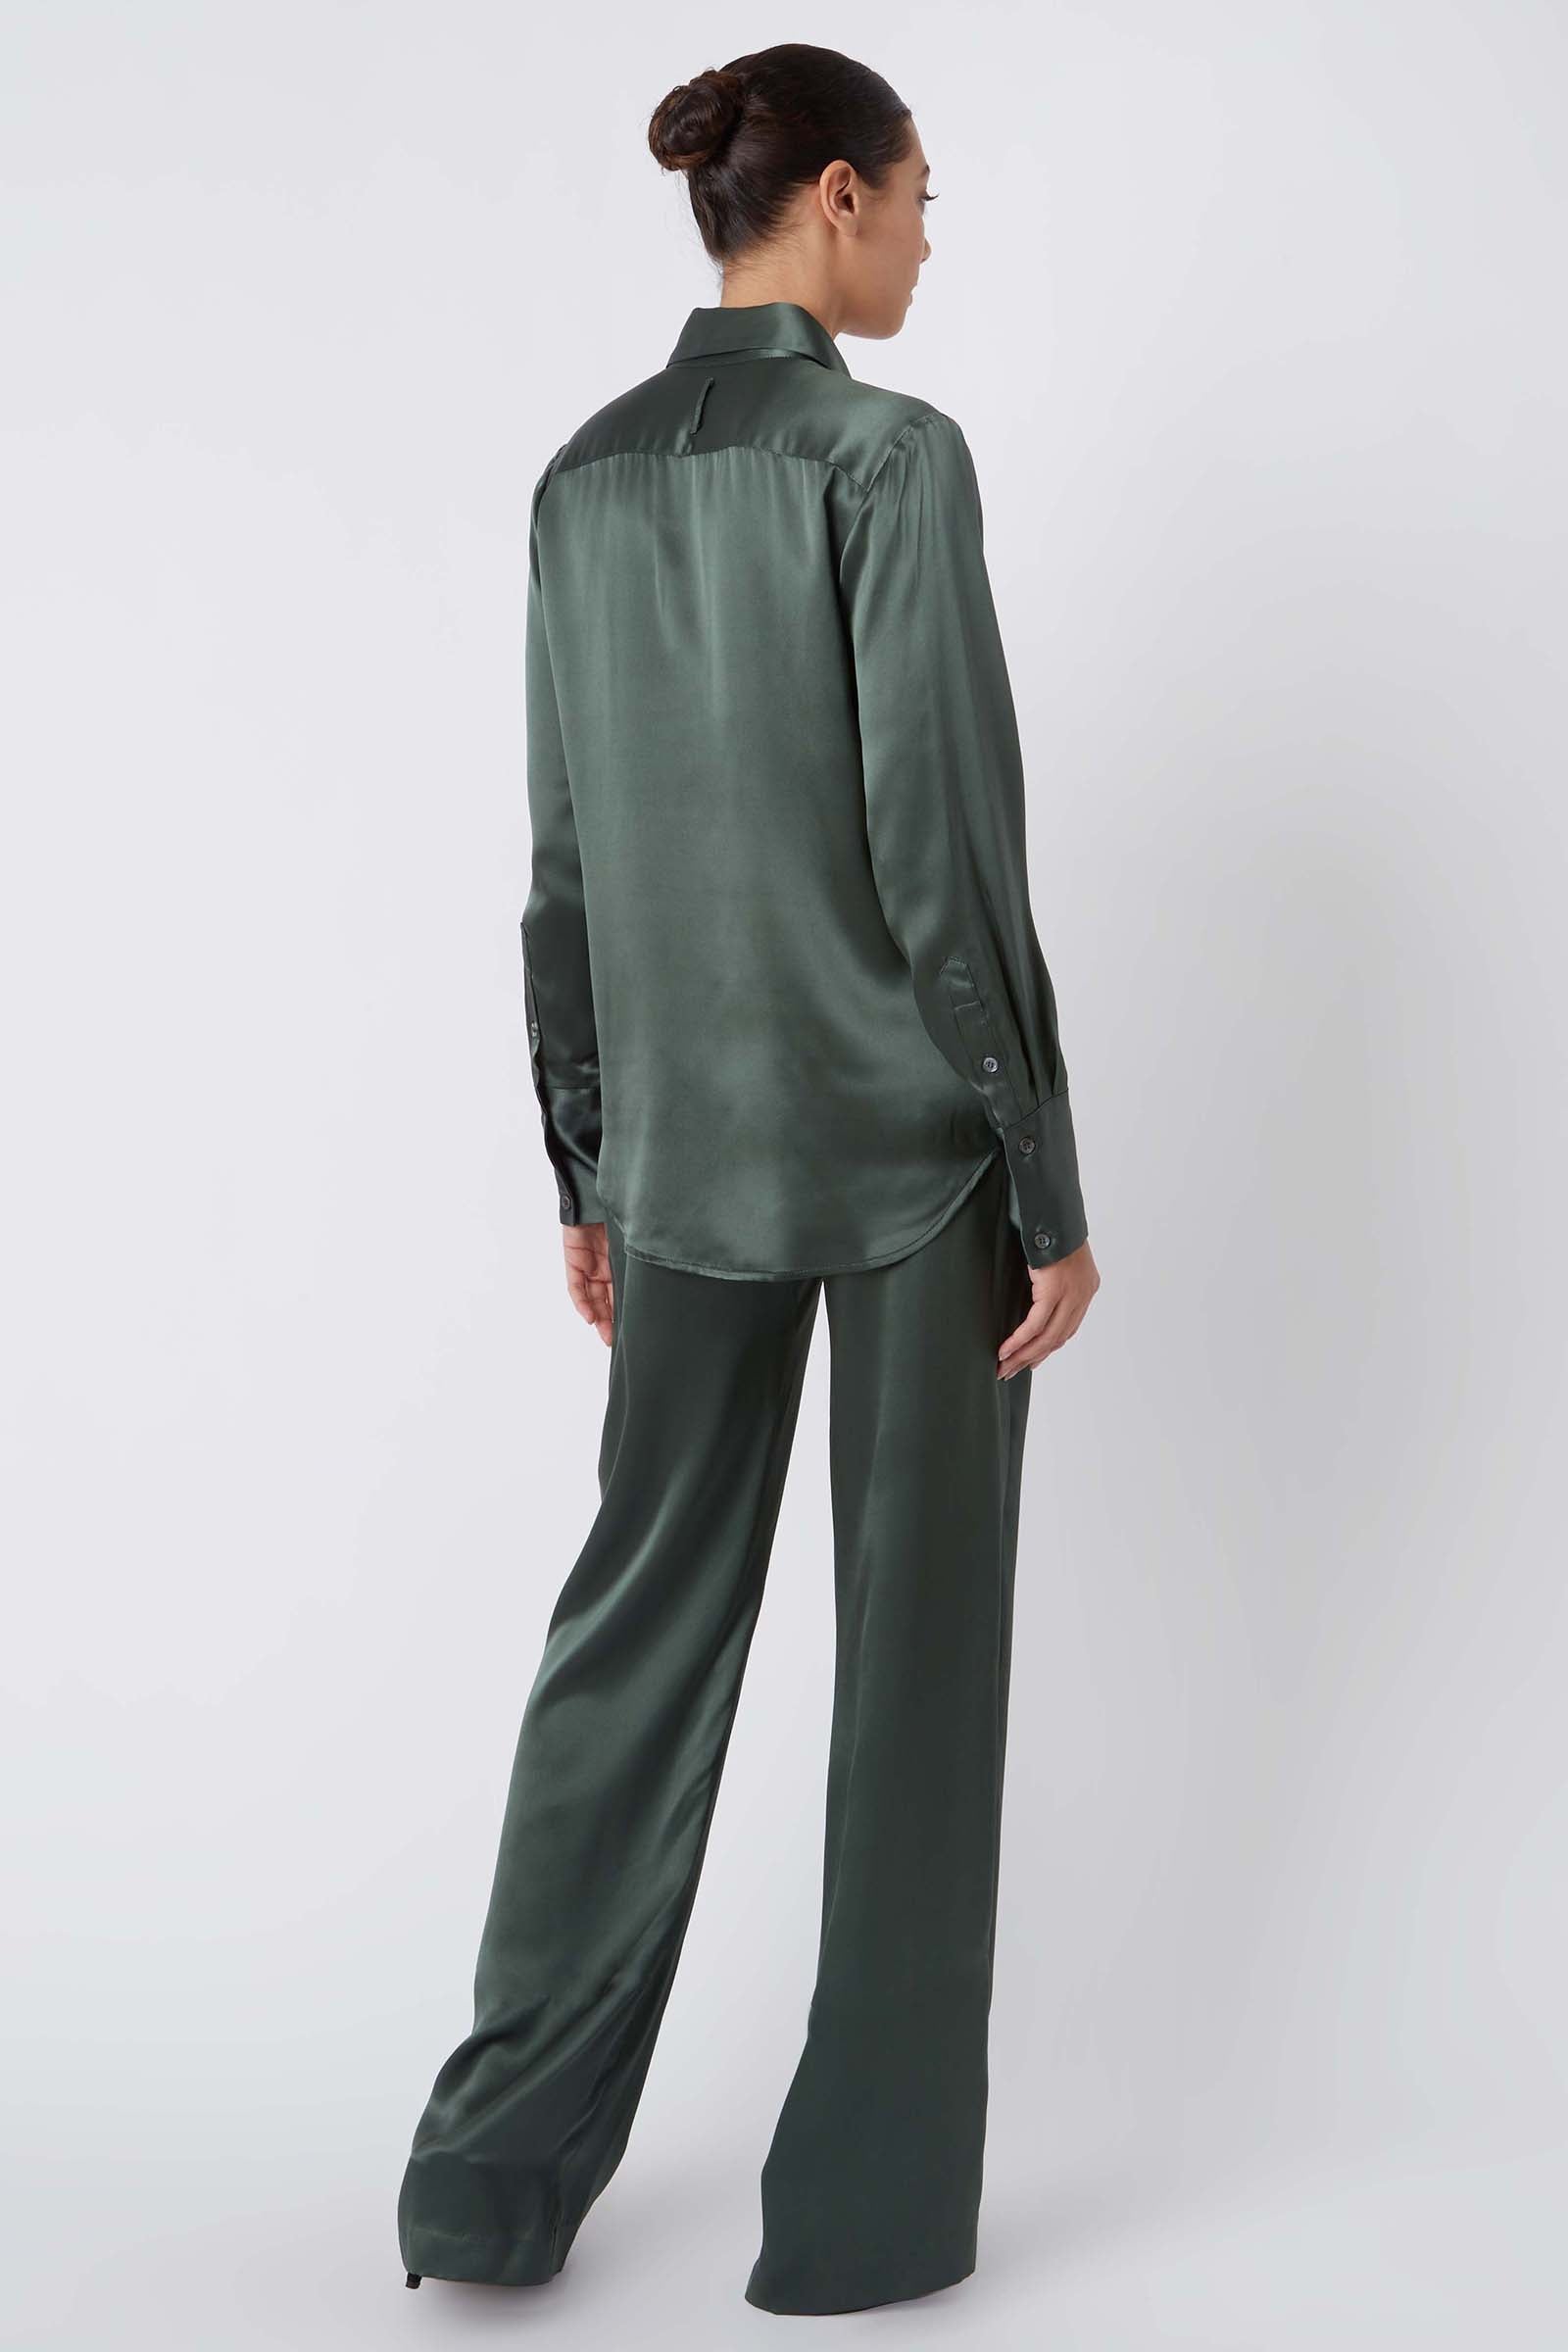 Kal Rieman Classic Tailored Blouse in Loden on Model Full Back View